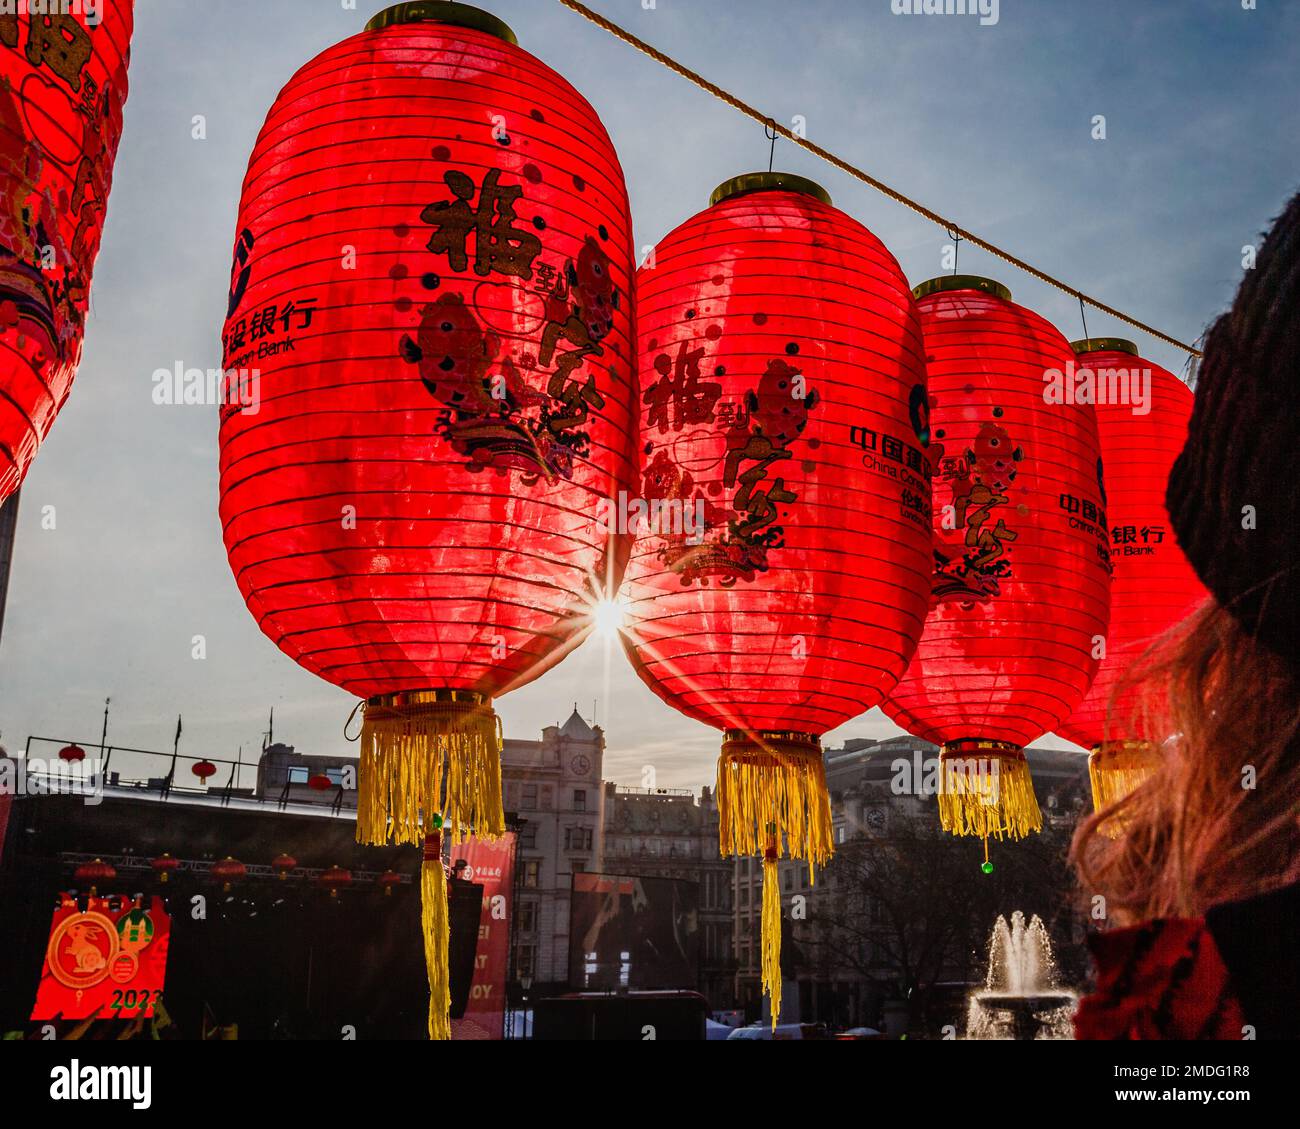 Sunlight shines through chinese red lanterns in Trafalgar Square as celebrations of the lunar new year get underway to usher in the year of the rabbit. Stock Photo